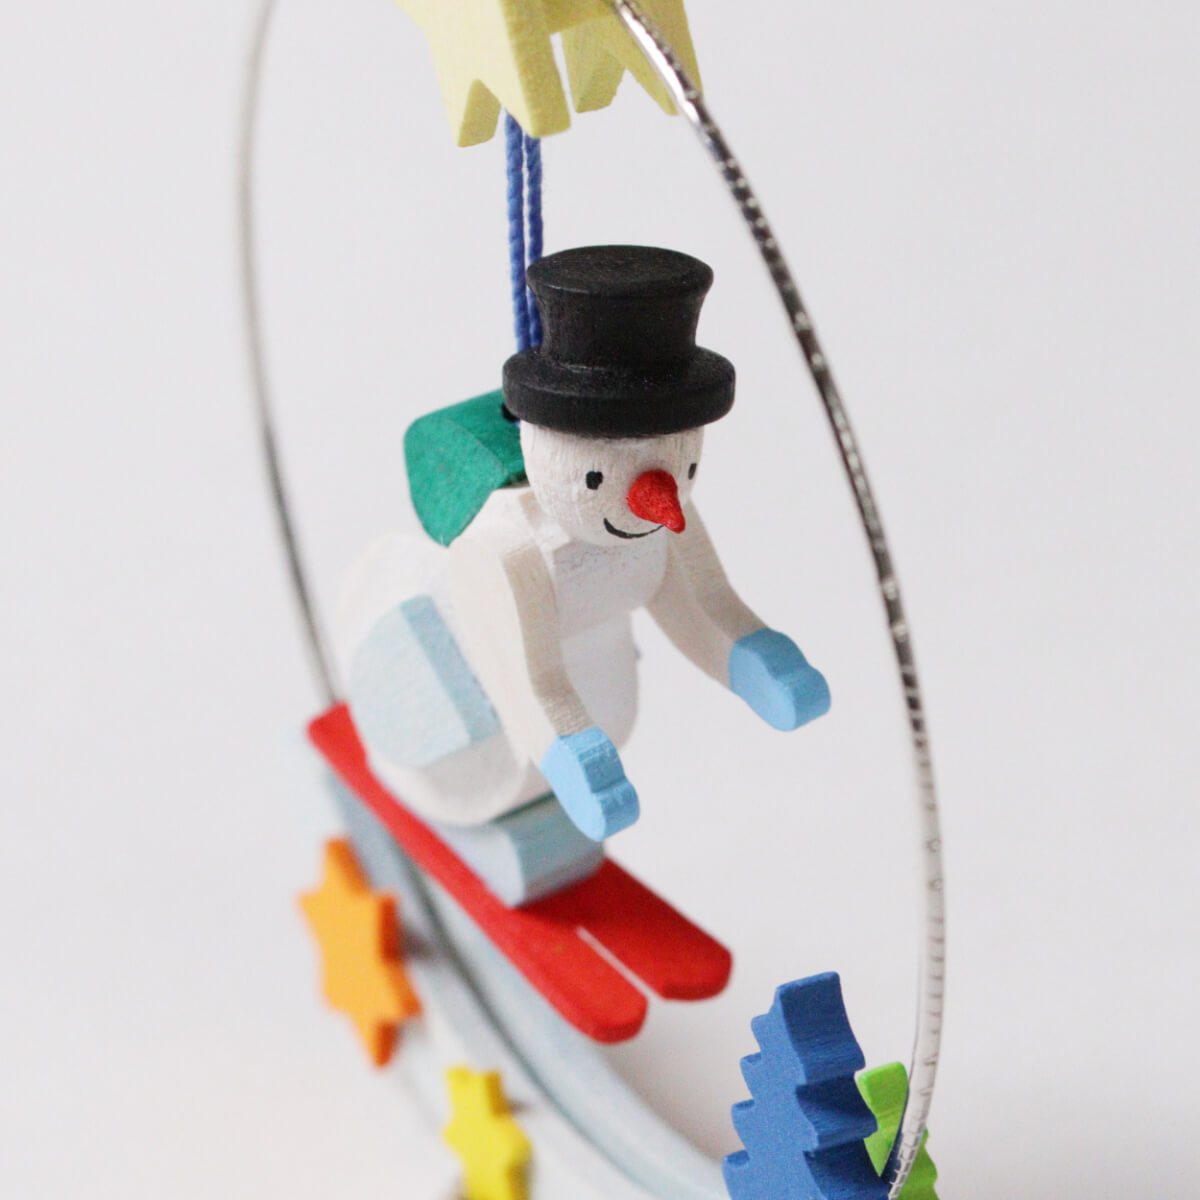 Ring with Miniature Figures Ornament with snowman